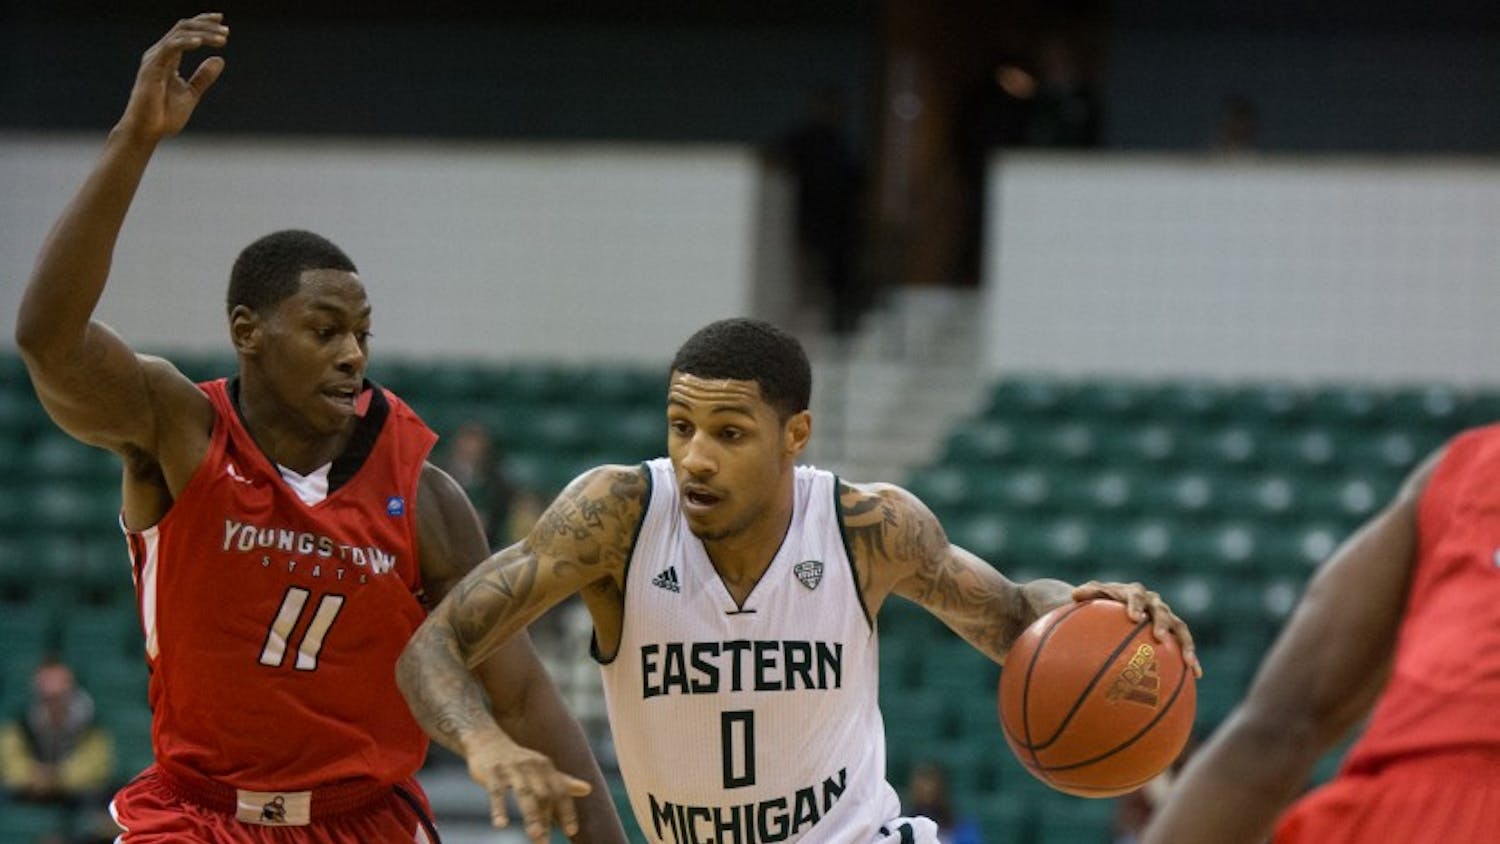 Eastern Michigan guard Ray Lee drives past the defender in the Eagles 71-62 win over Youngstown State Friday night in Ypsilanti.